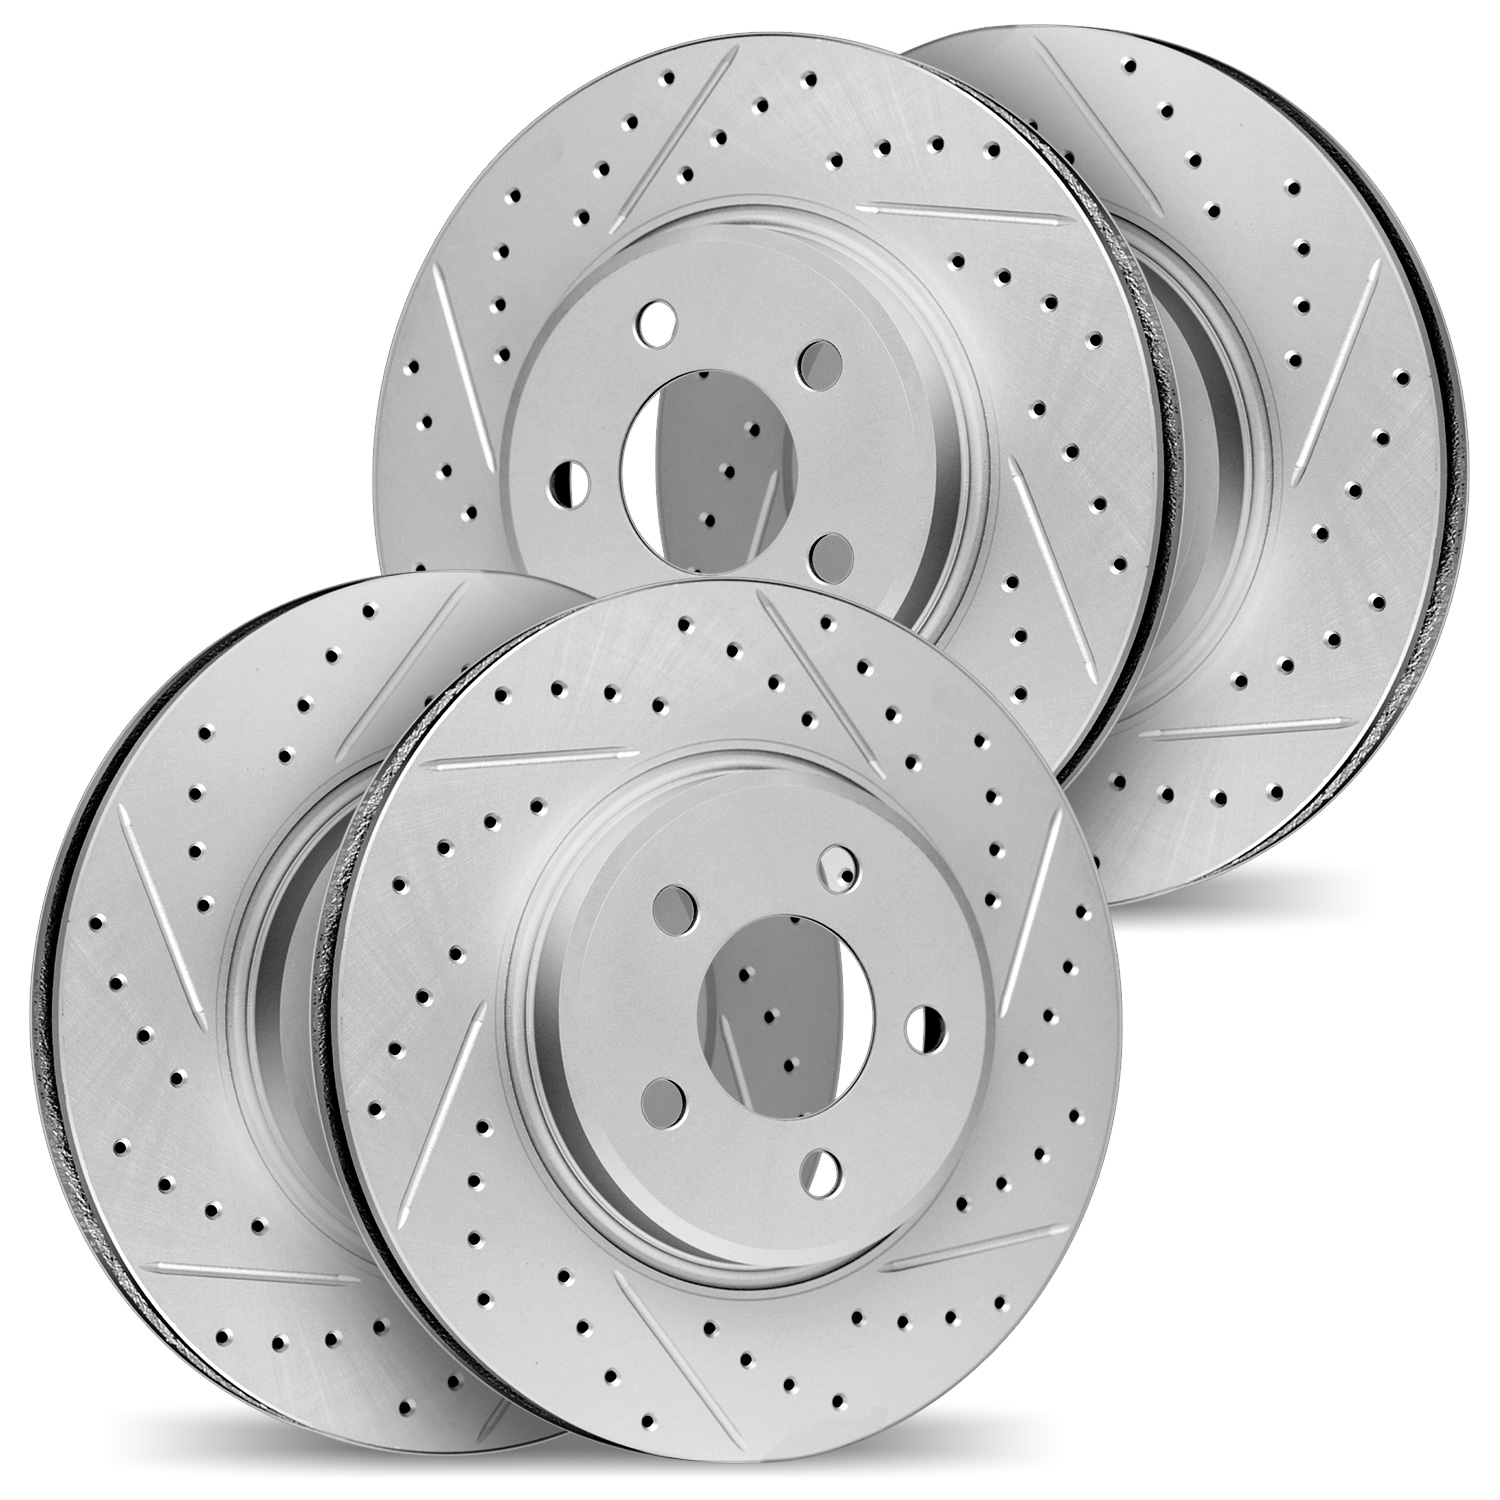 2004-75009 Geoperformance Drilled/Slotted Brake Rotors, 2009-2011 Lexus/Toyota/Scion, Position: Front and Rear